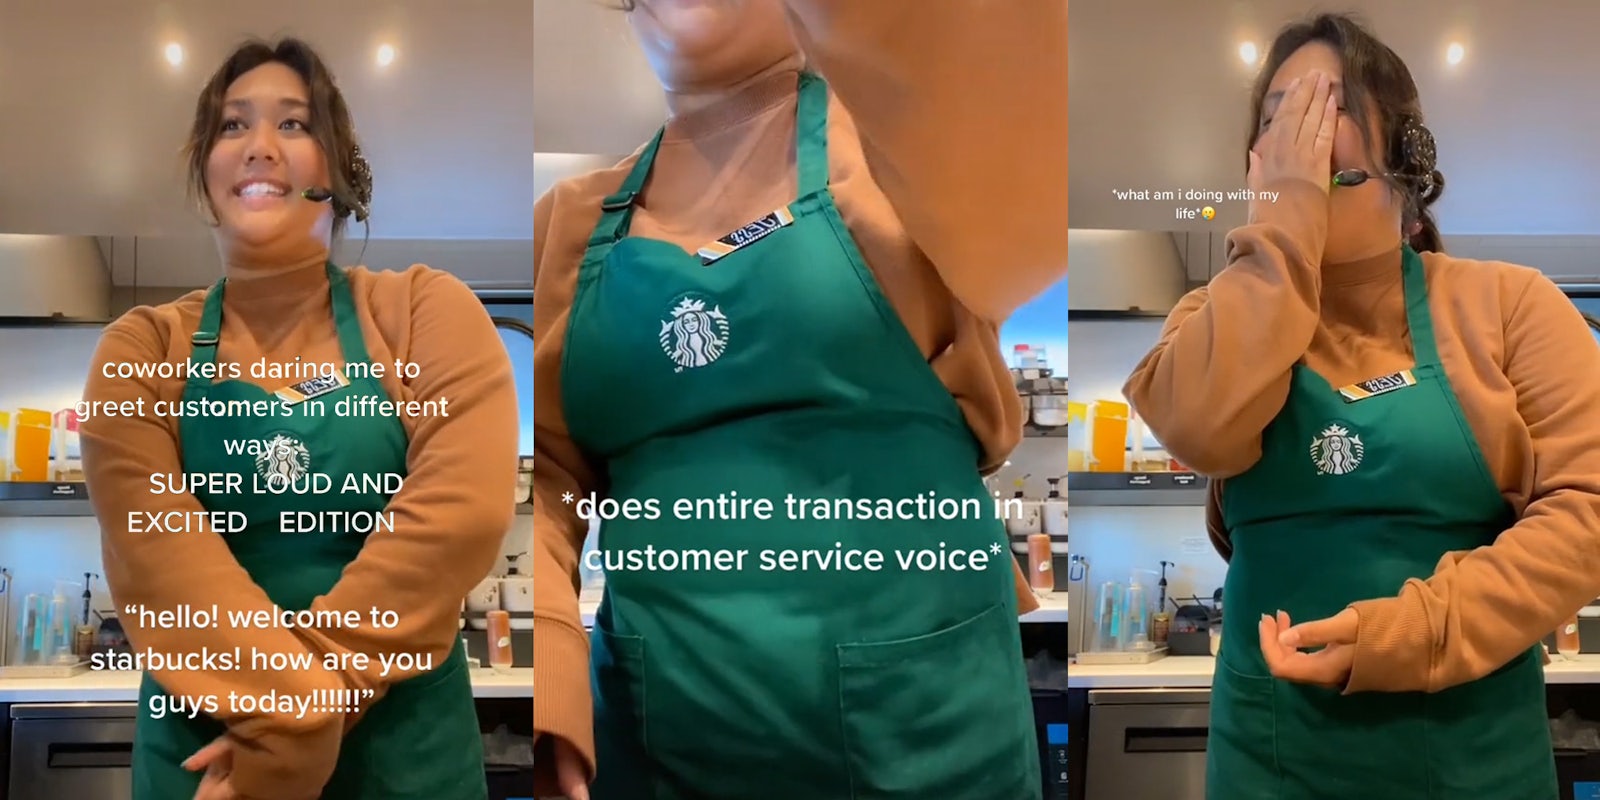 Starbucks worker speaking into headset taking order smiling hands together caption 'coworkers daring me to greet customers in different ways: SUPER LOUD AND EXCITED EDITION 'hello! welcome to starbucks! how are you guys today!!!!!' (l) Starbucks employee completing order transaction caption '*in customer service voice*' (c) Starbucks employee speaking into headset taking order hand on face laughing caption '*what am I doing with my life*' (r)